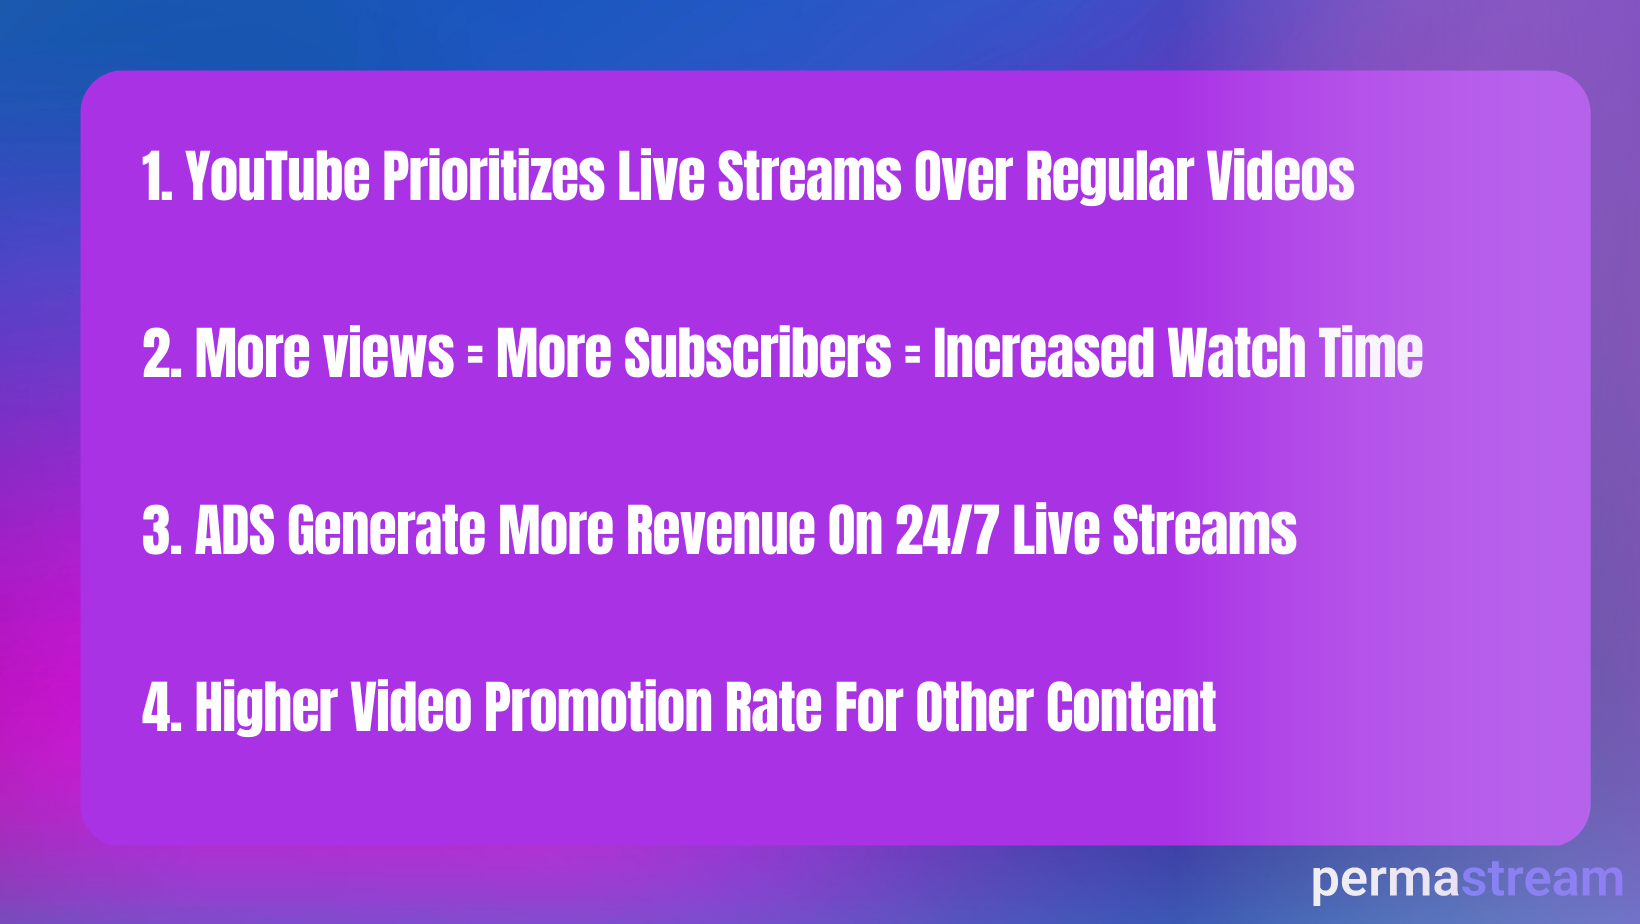 Increase Your YouTube Channel's Growth Through 24/7 Live Streaming